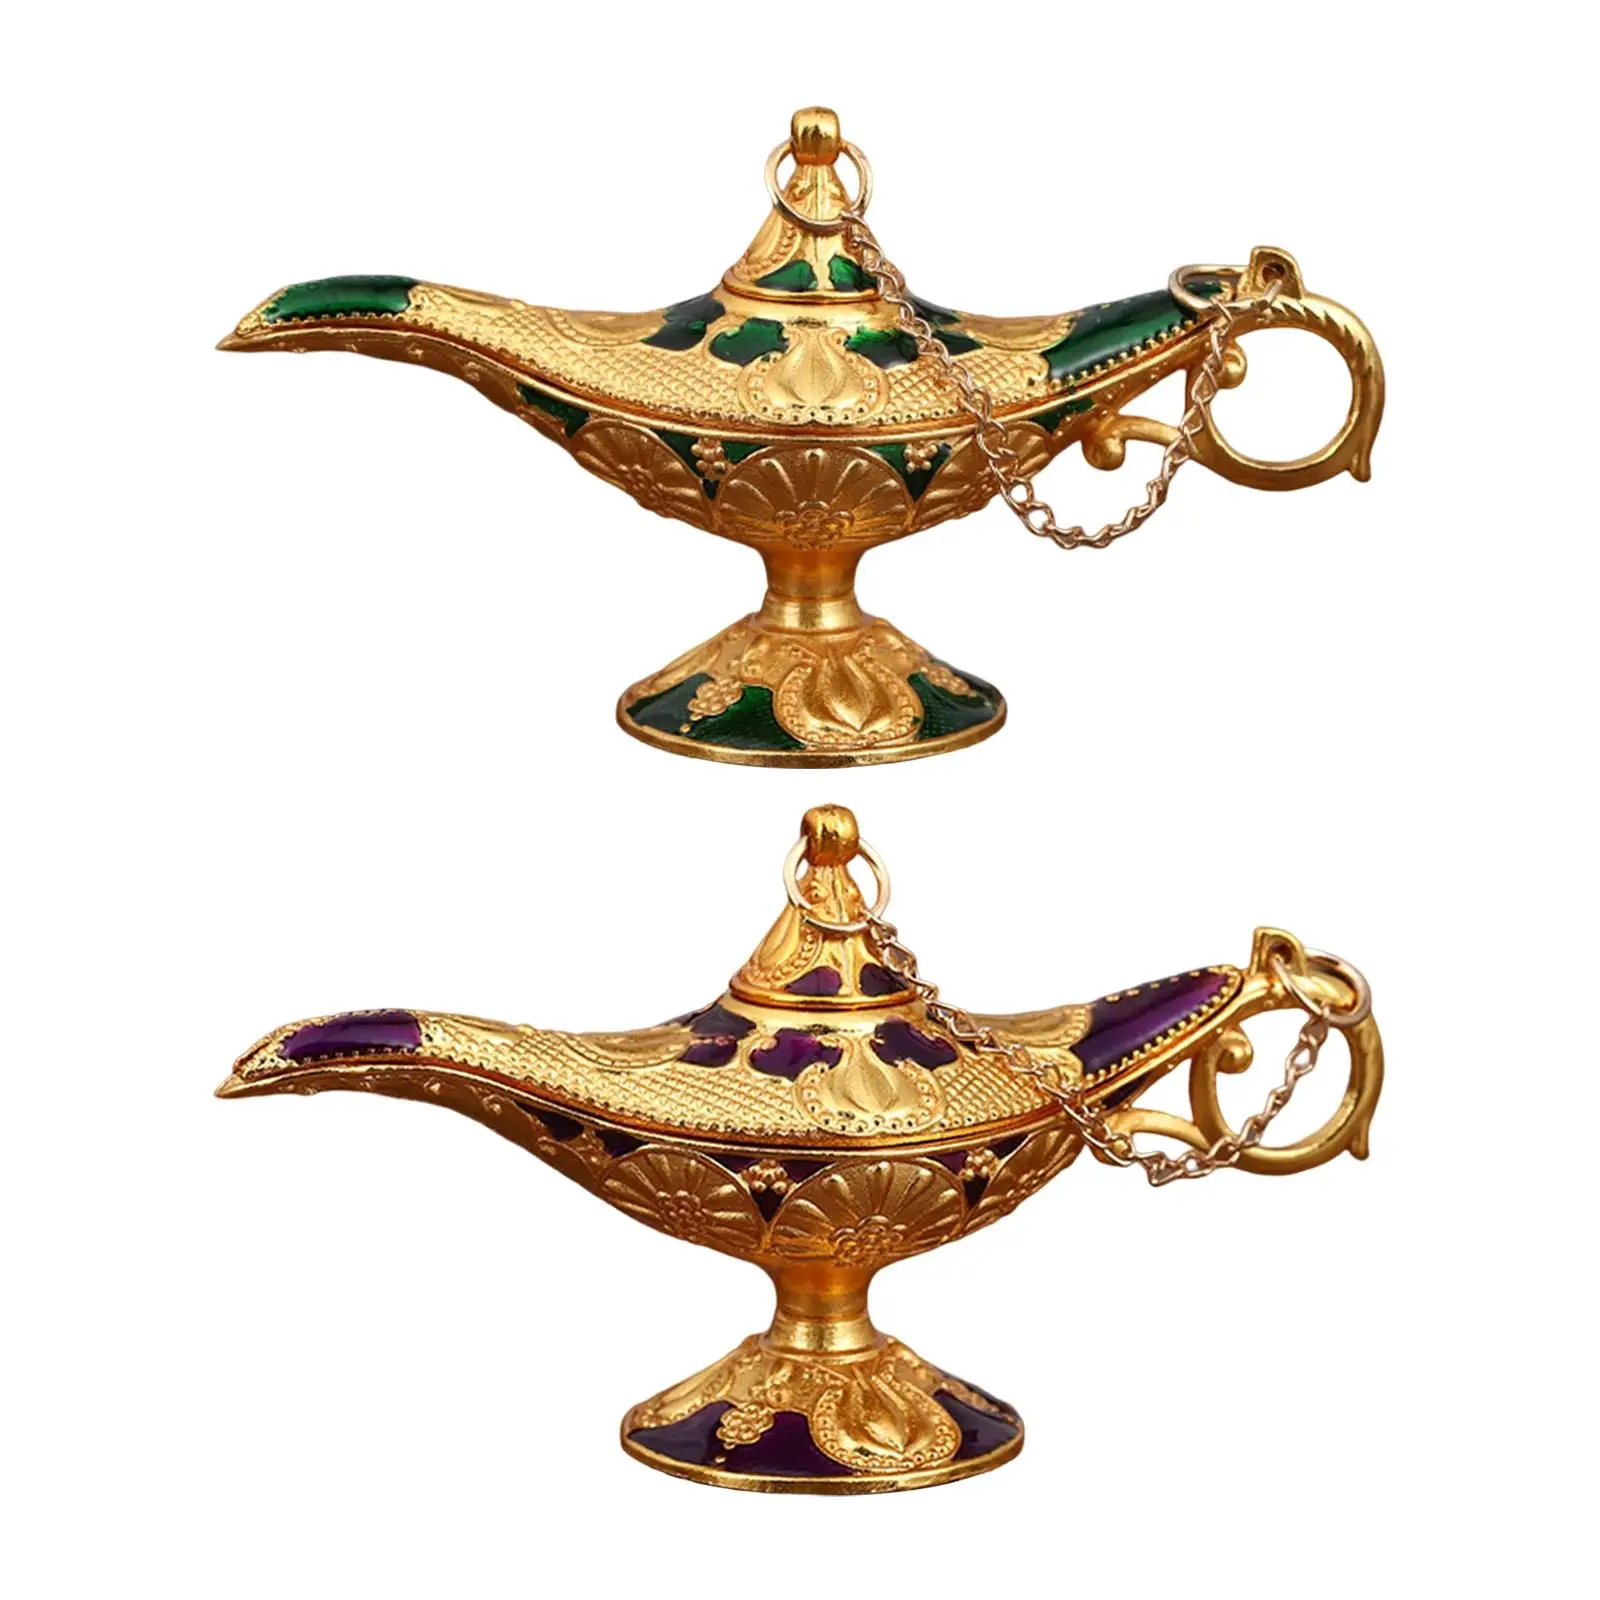 Genie Lamp Desktop Ornament Classic Arabian Stage Show Props Wishing Light for Birthday Gift Wedding Party Living Room Table